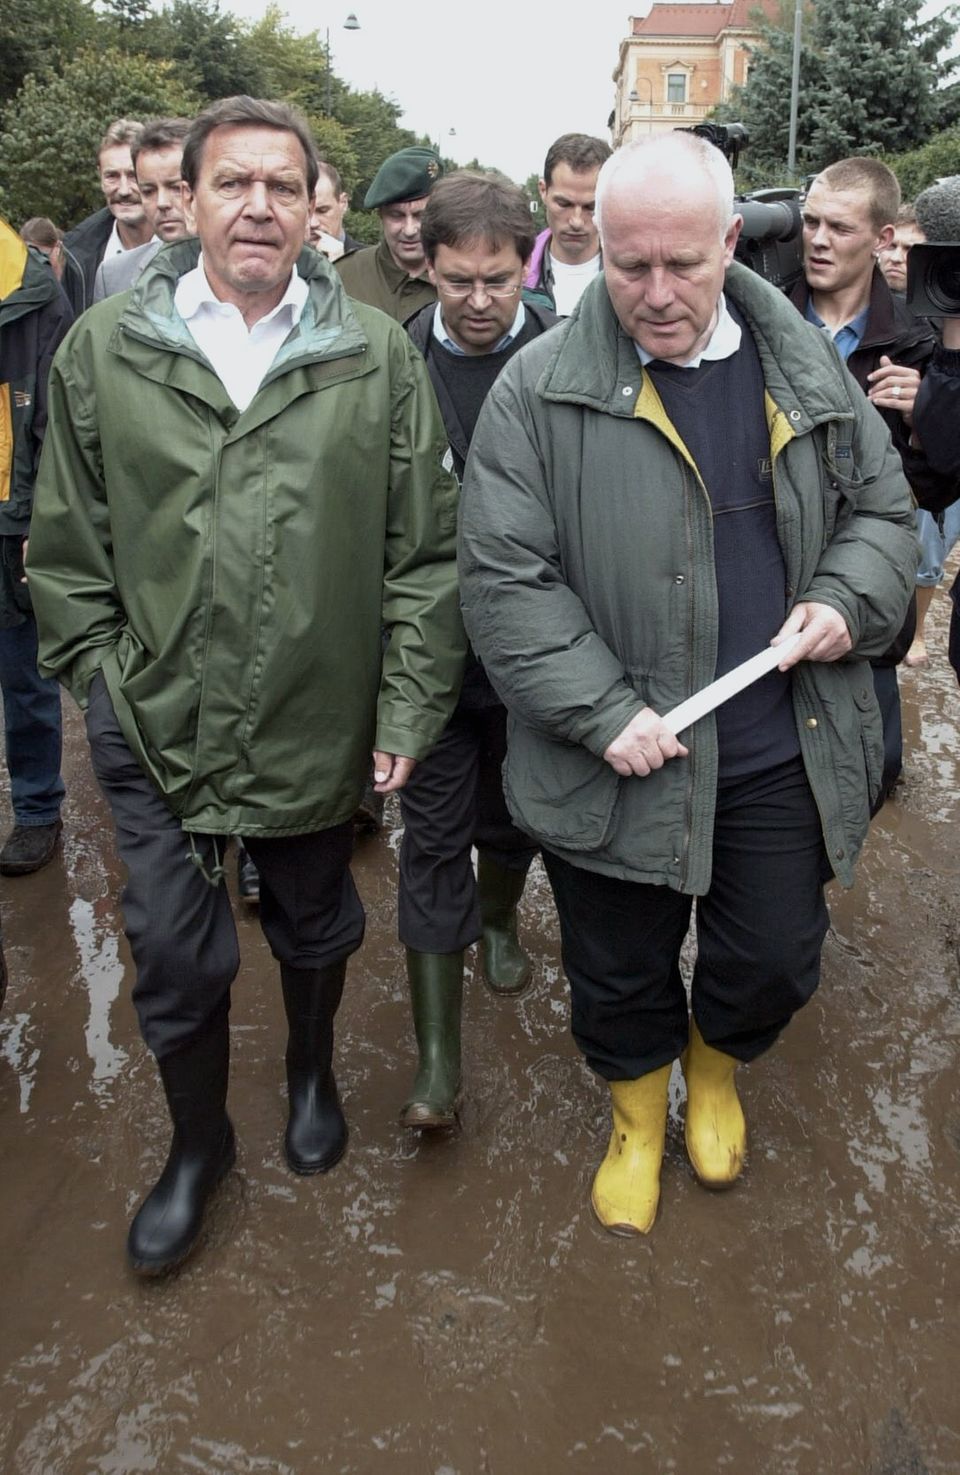 Archive image of Chancellor Gerhard Schröder and Saxony's Prime Minister Georg Milbradt in rubber boots and rain gear